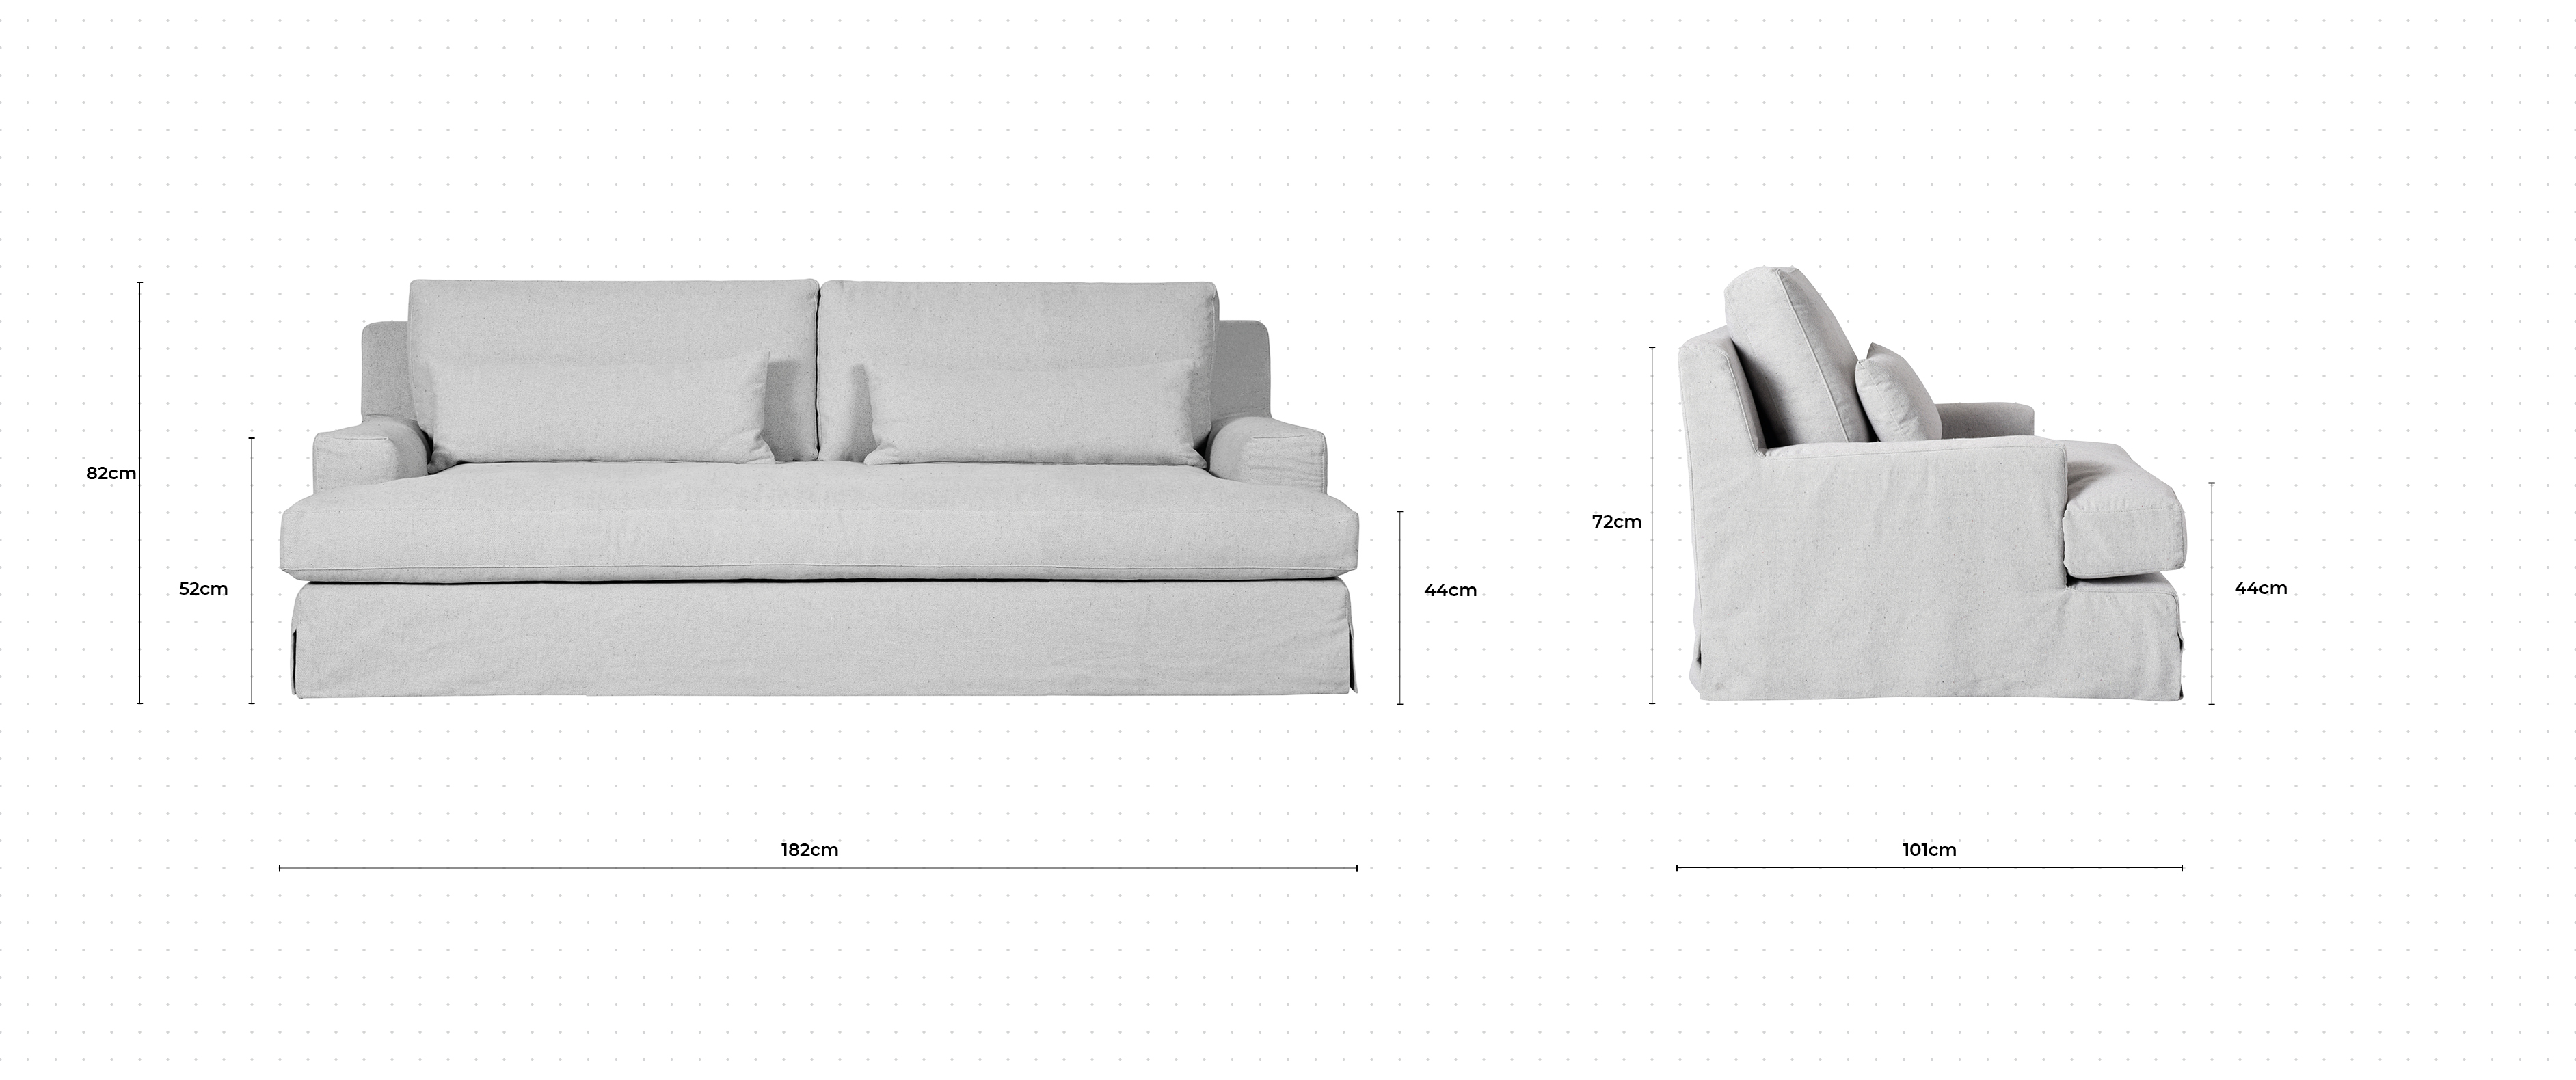 Panama With Skirt 2 Seater Sofa dimensions